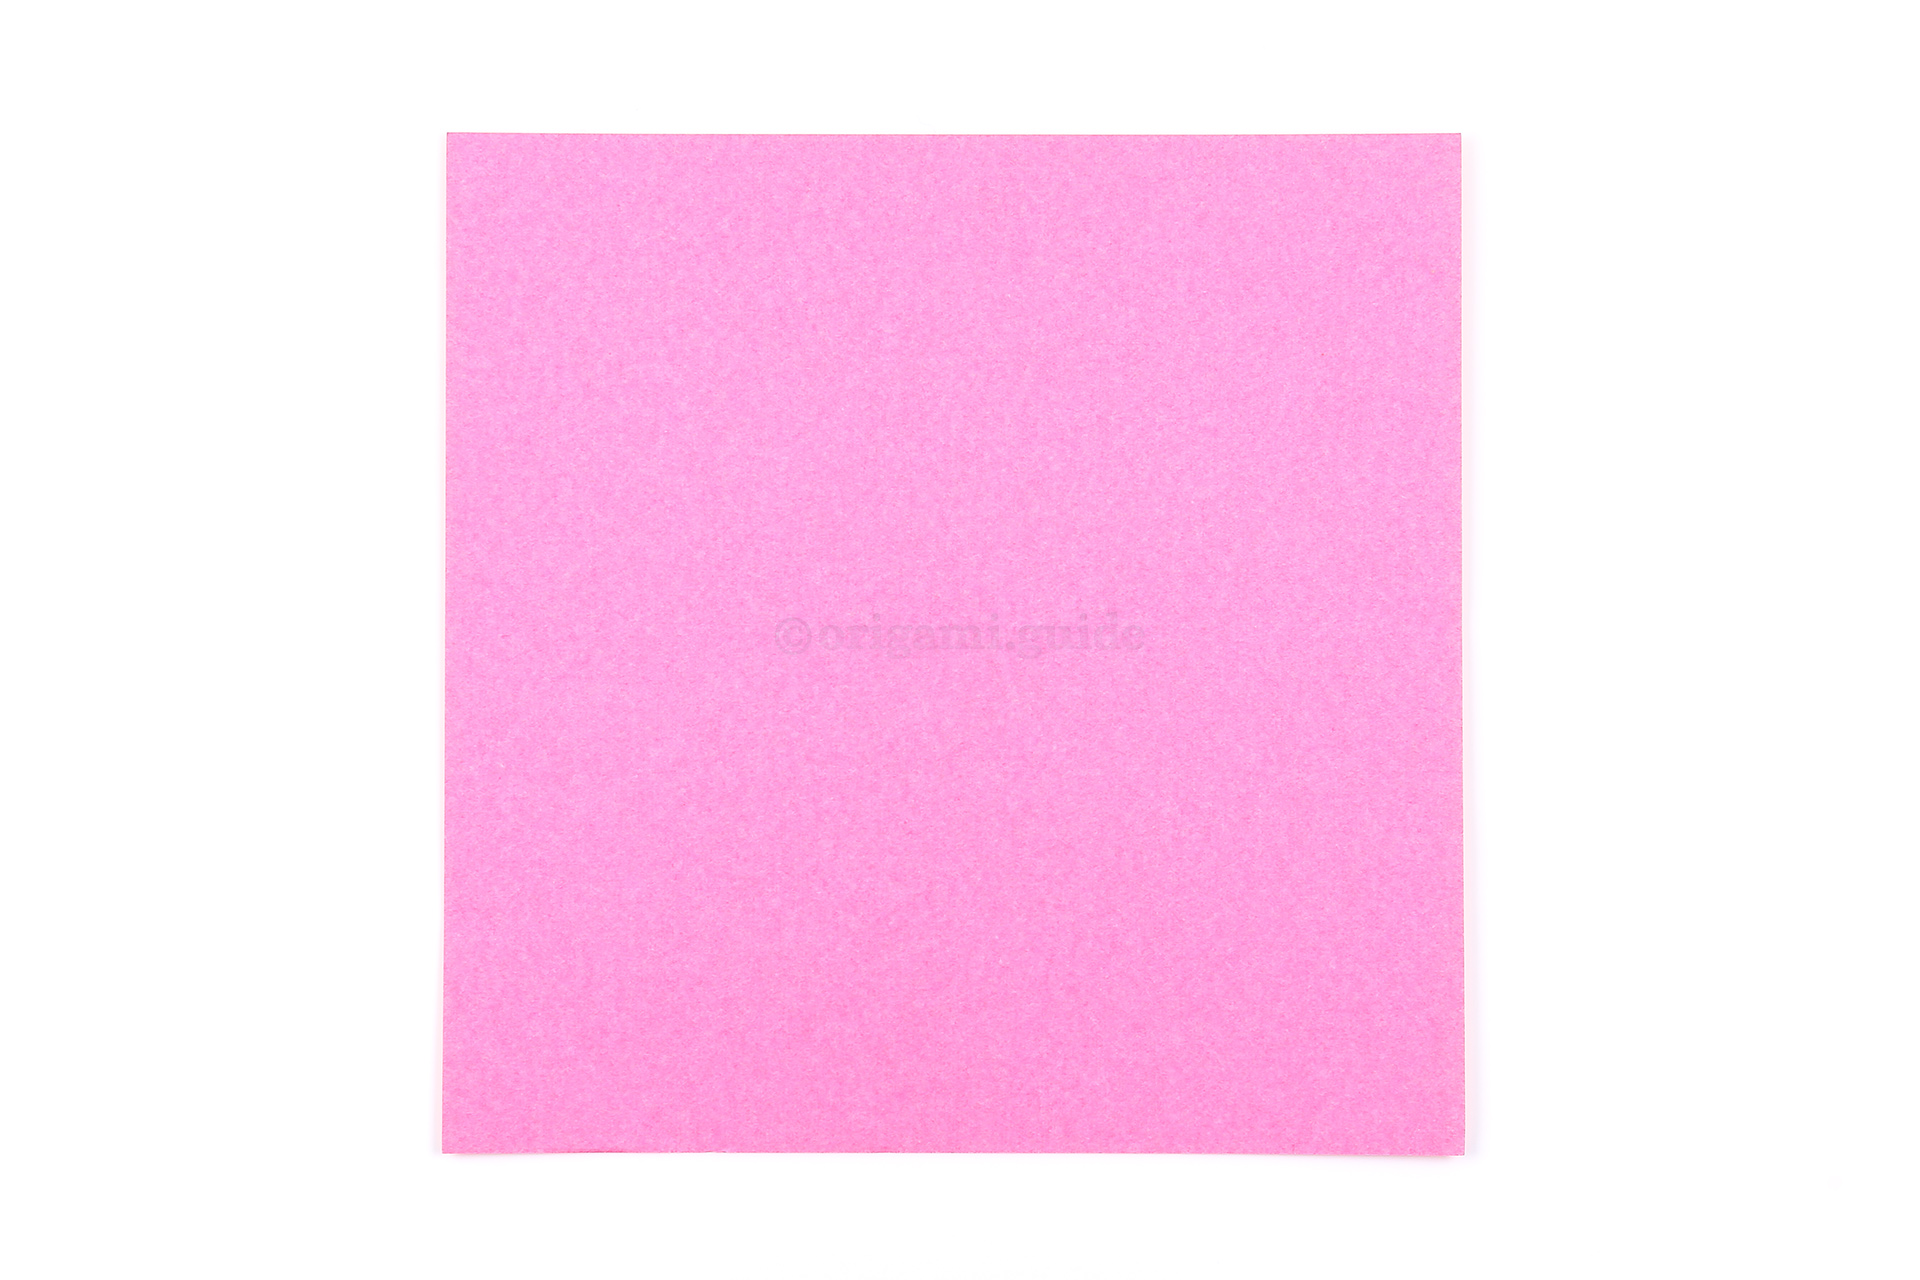 This is the front of our origami paper, this colour will be the only visible colour on the finished model.